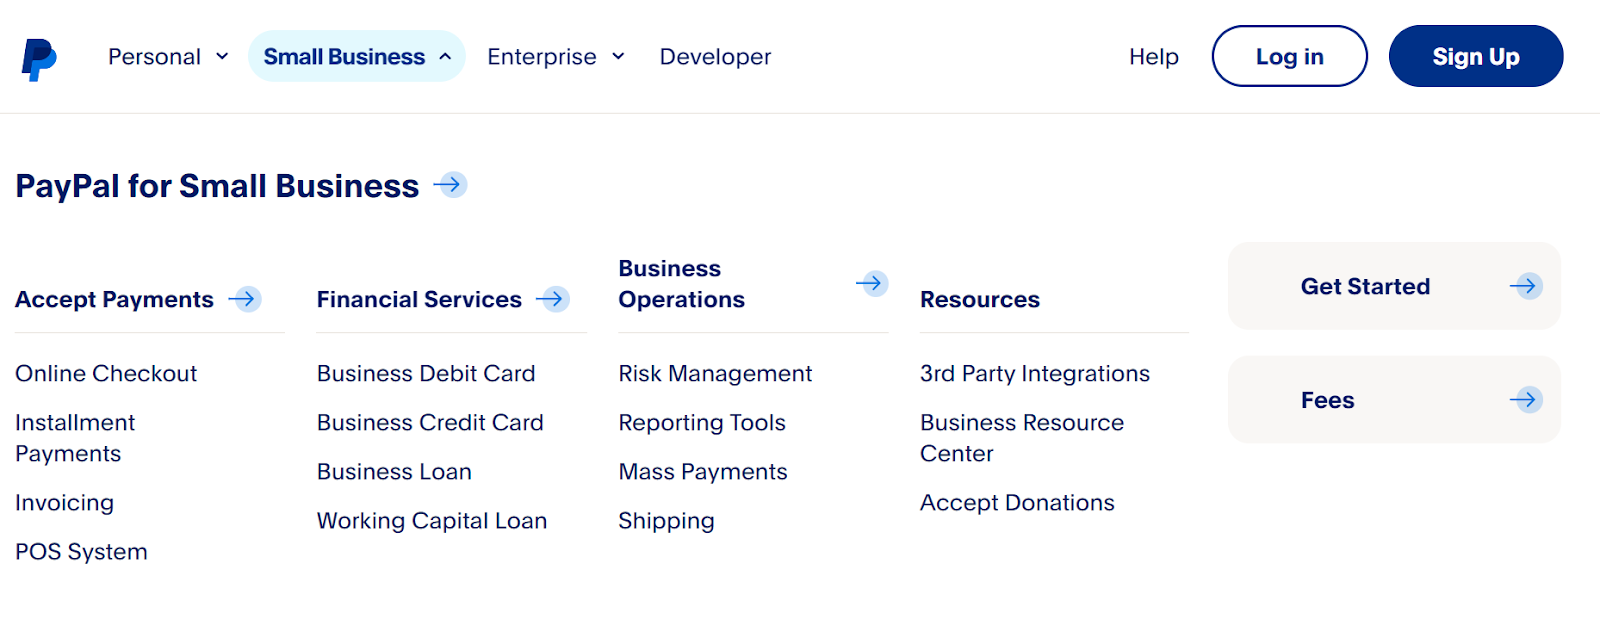 PayPal Working Capital is a loan program designed for small businesses